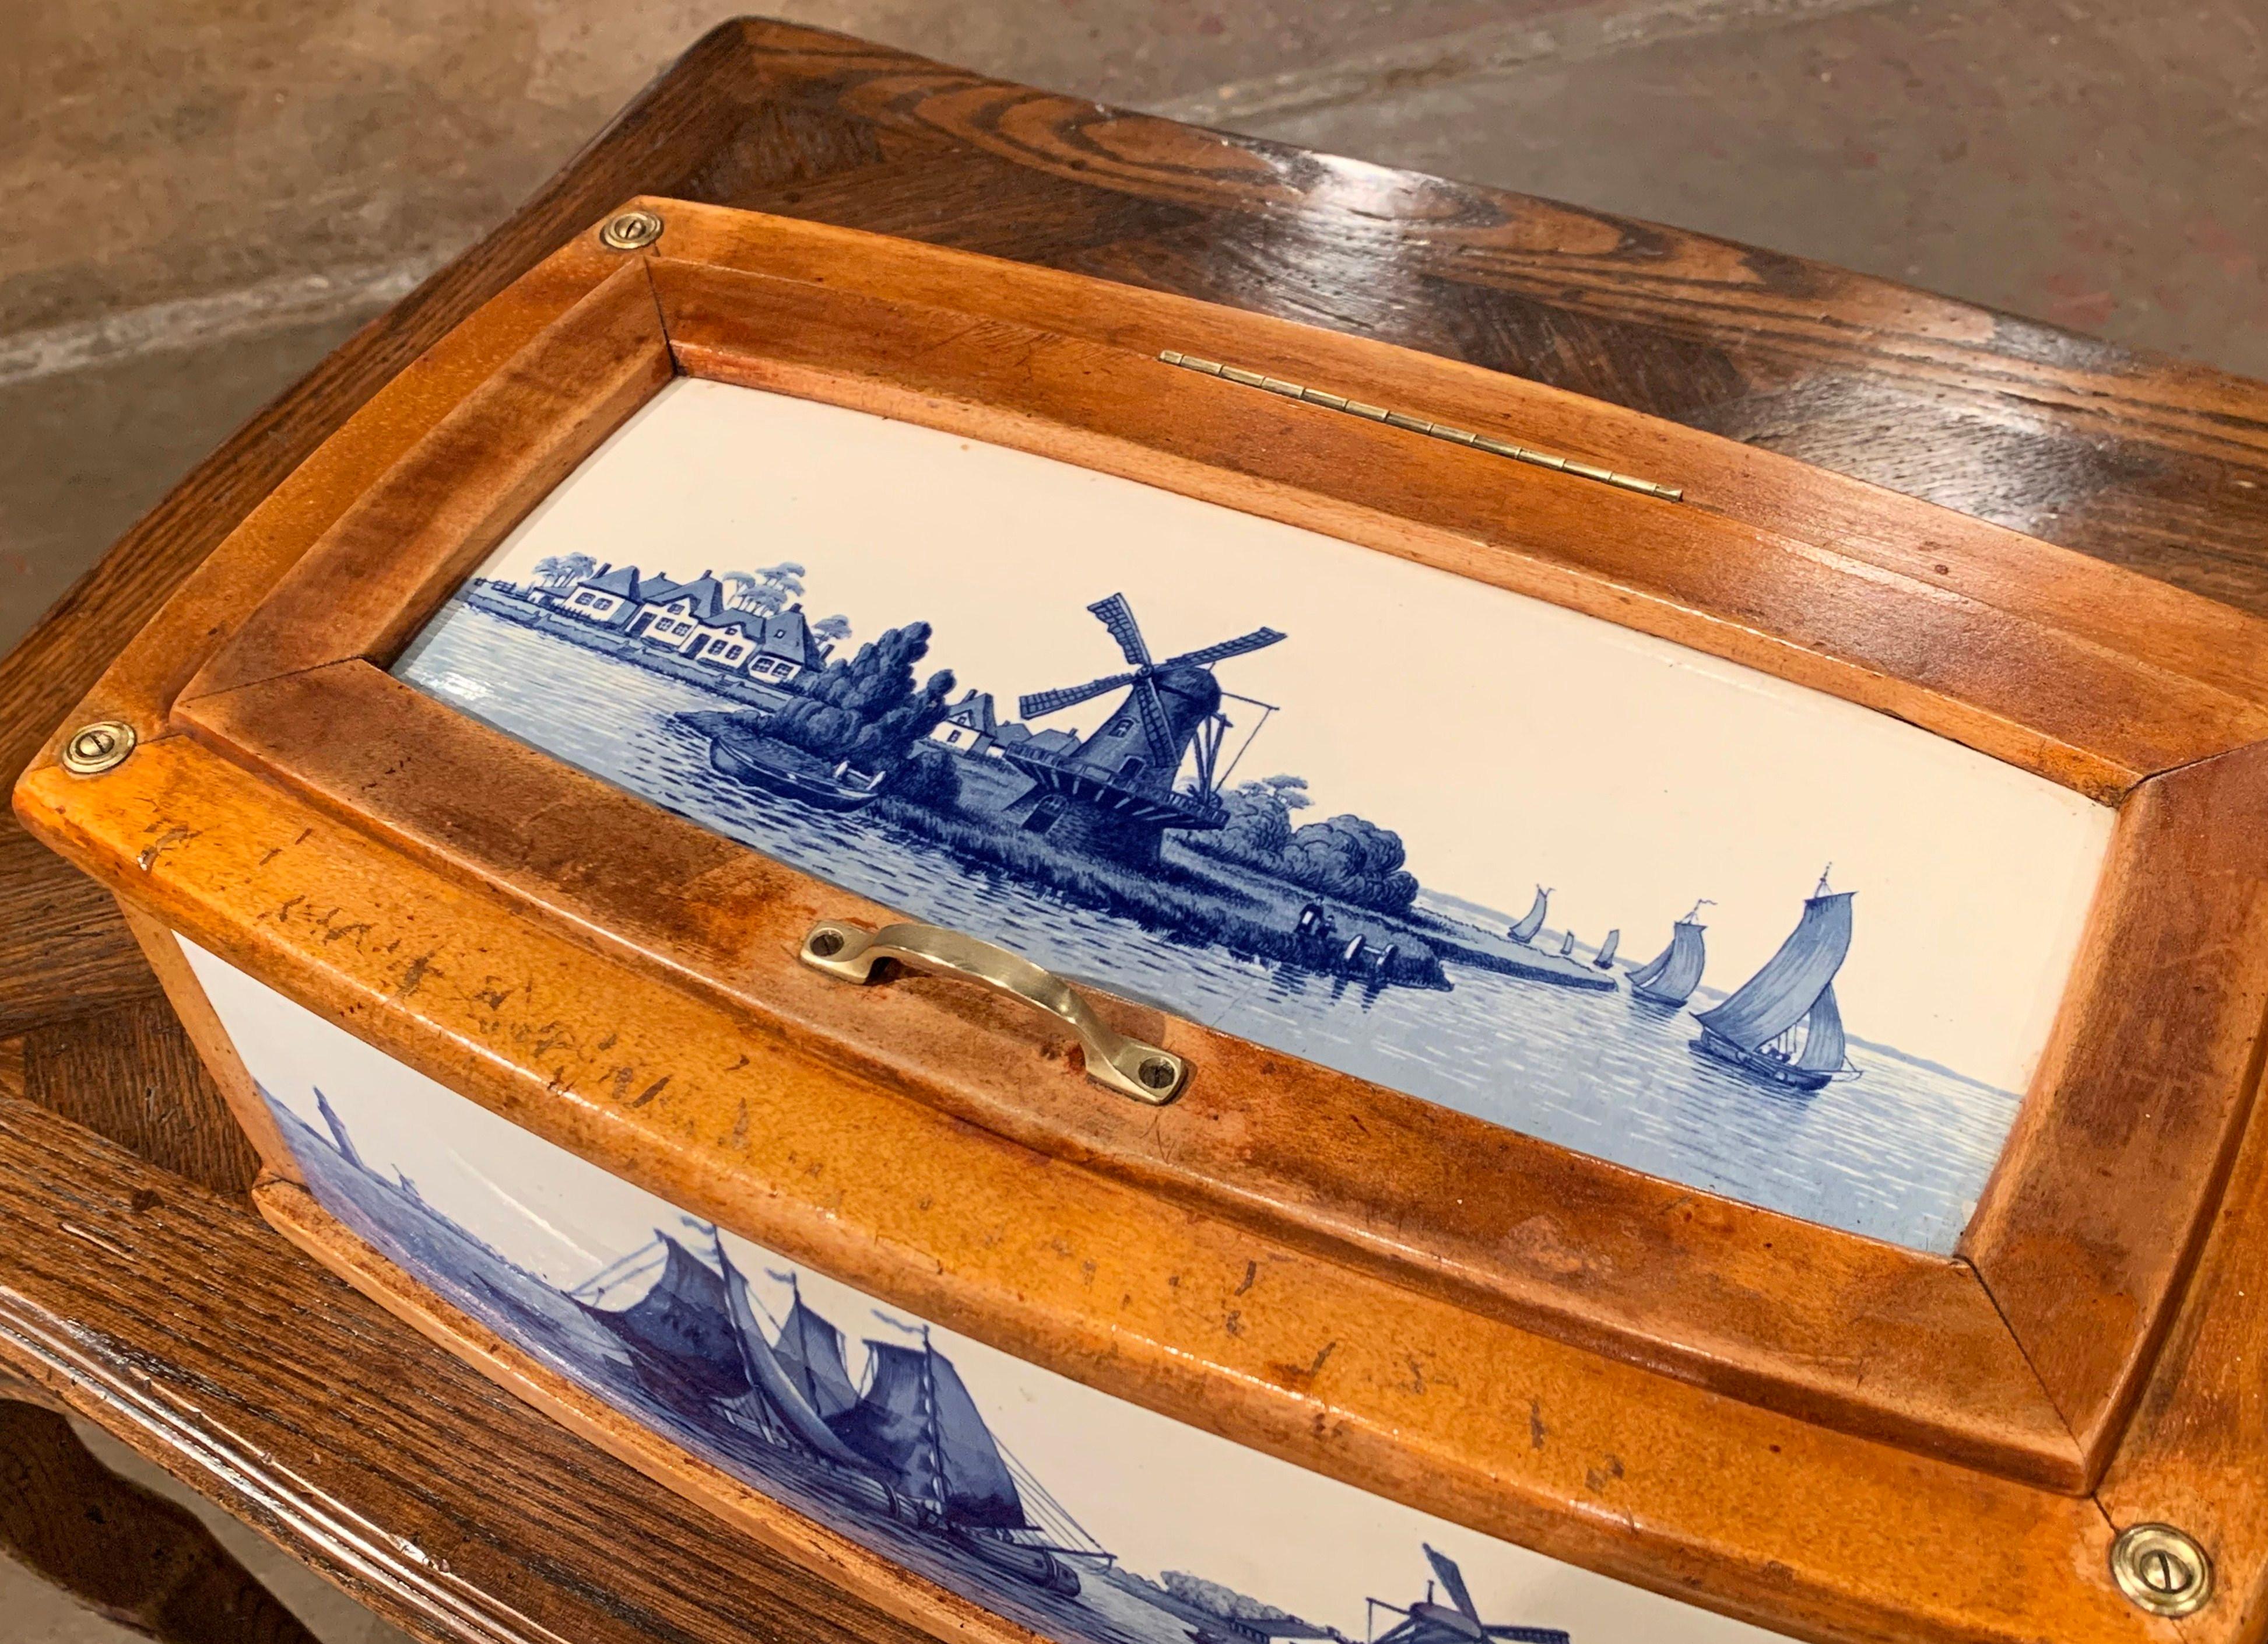 Decorate a kitchen counter with this antique, maple and porcelain bread box. Crafted in northern France circa 1870, the colorful box features four bowed sides decorated with hand painted blue and white porcelain tiles in the manner of Delft. The